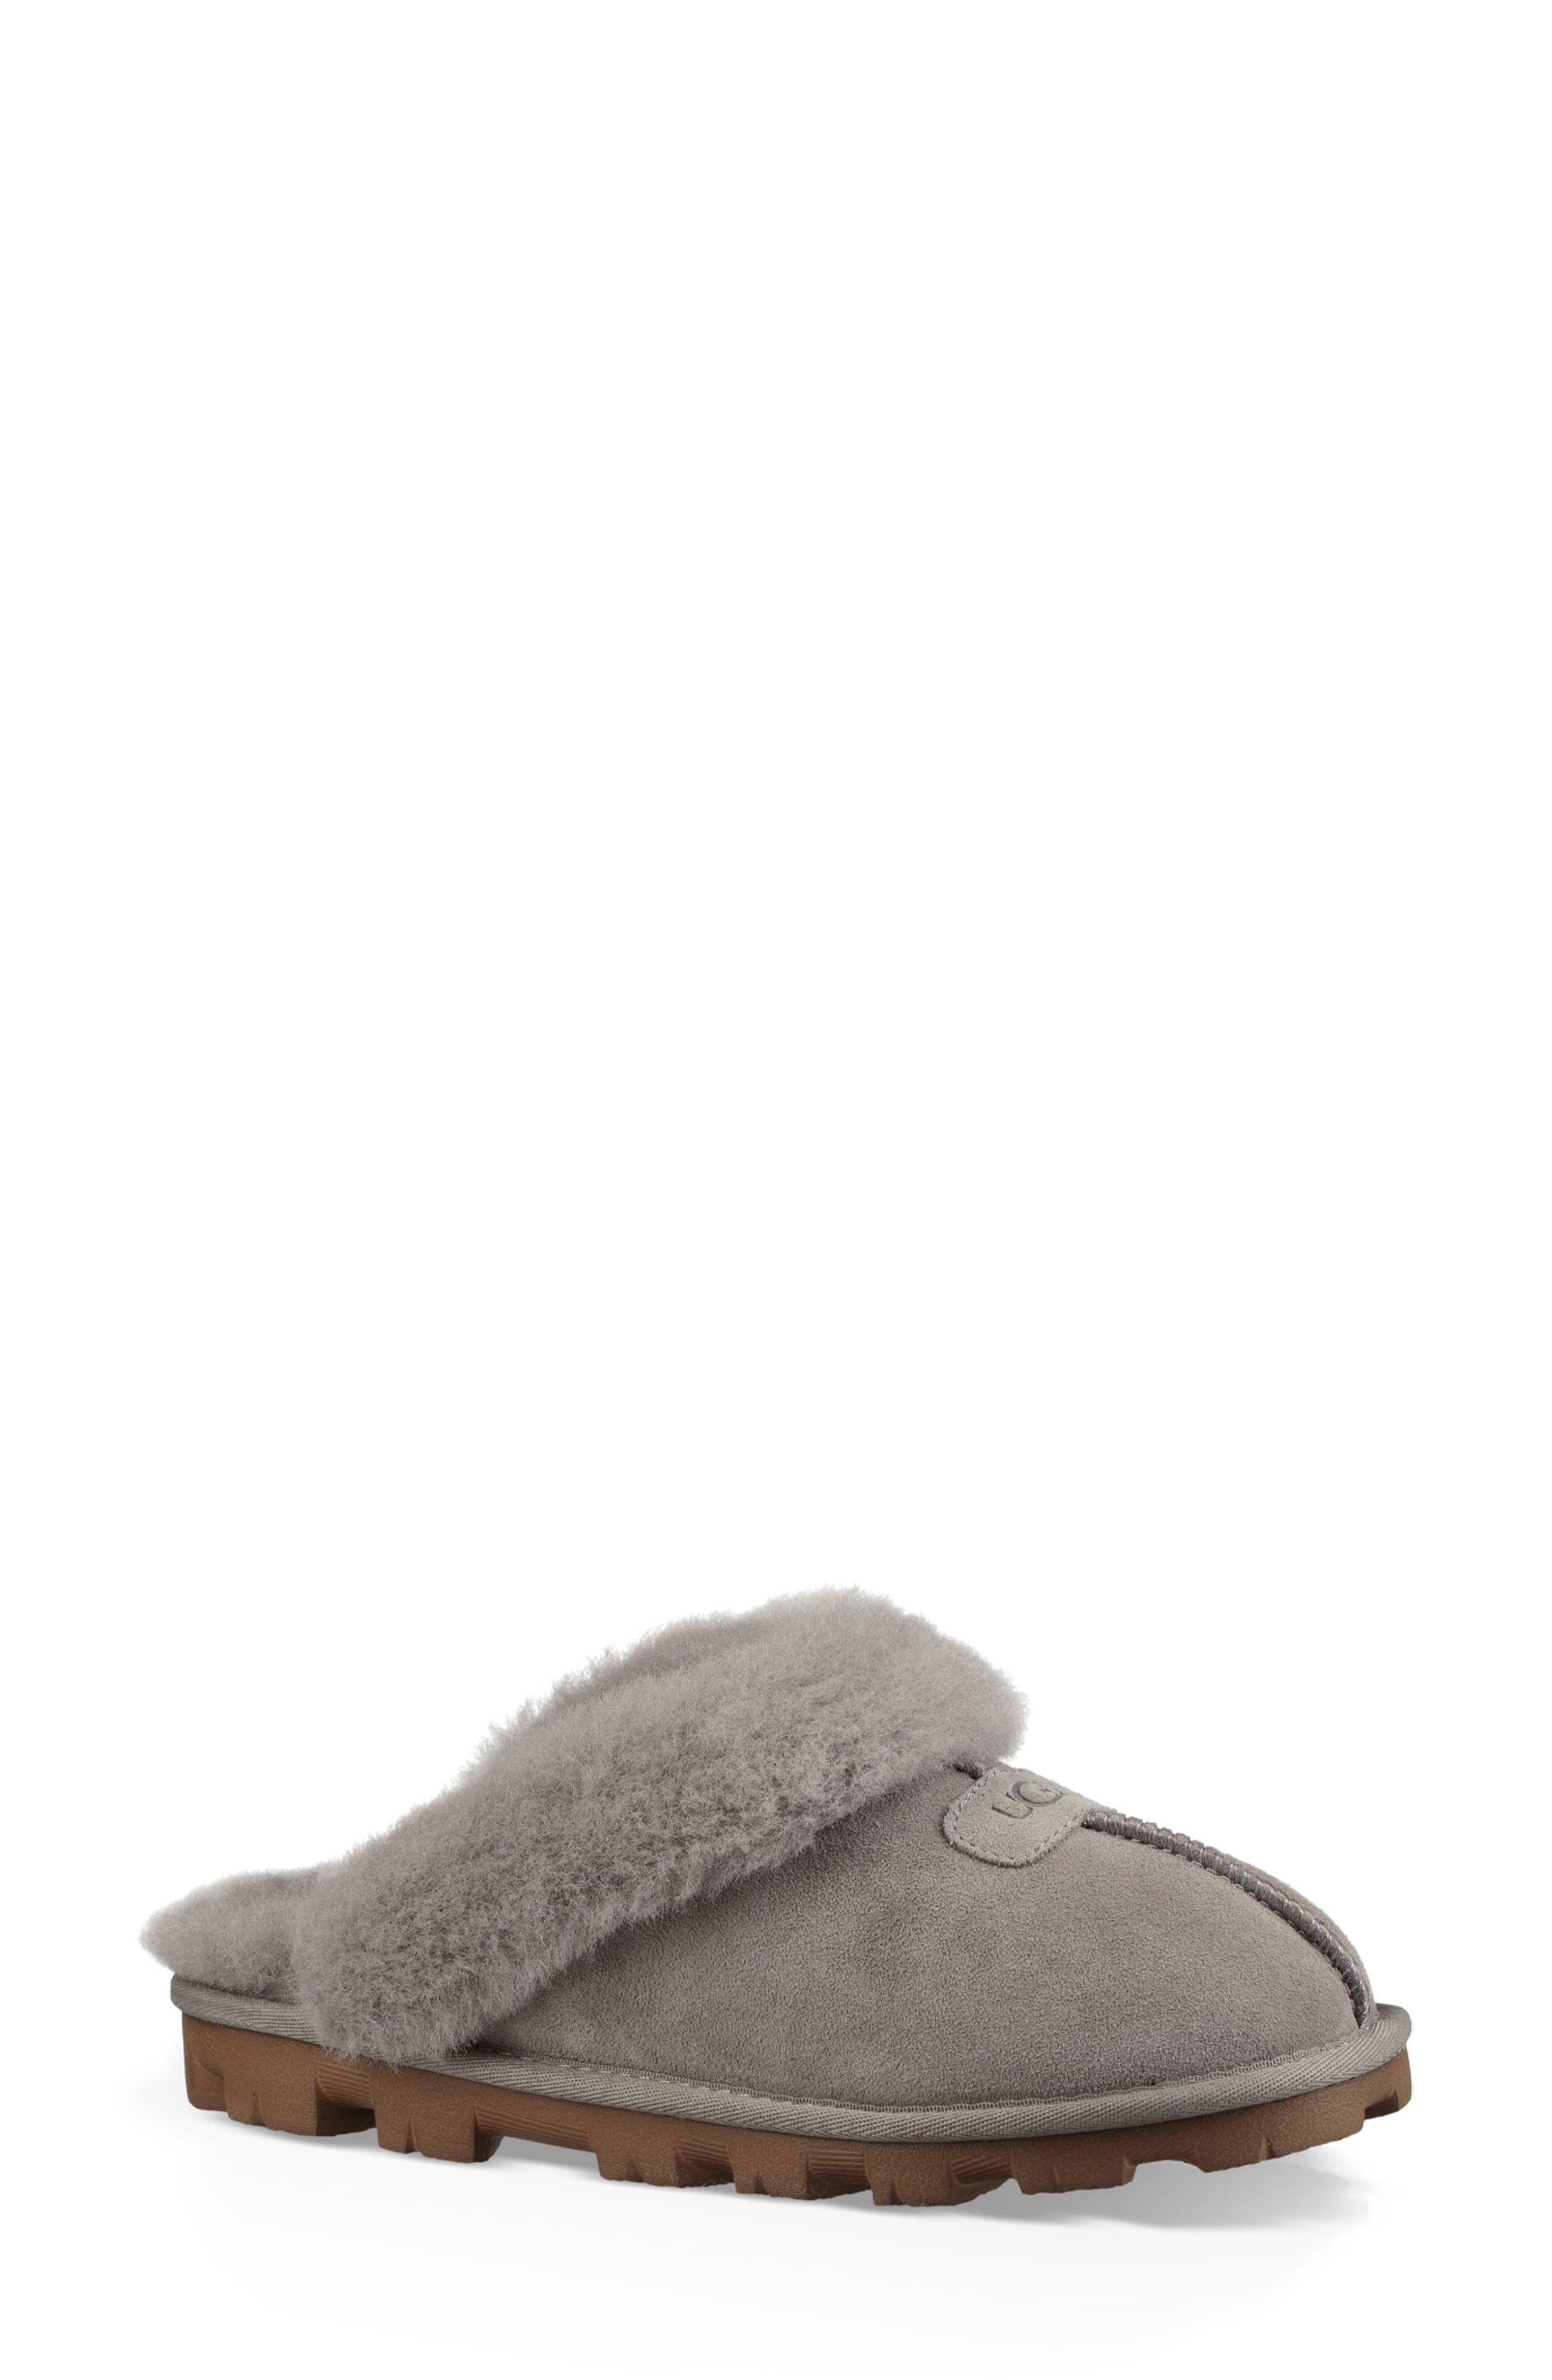 Comfiest slippers ever!!. Wish List. Shearling